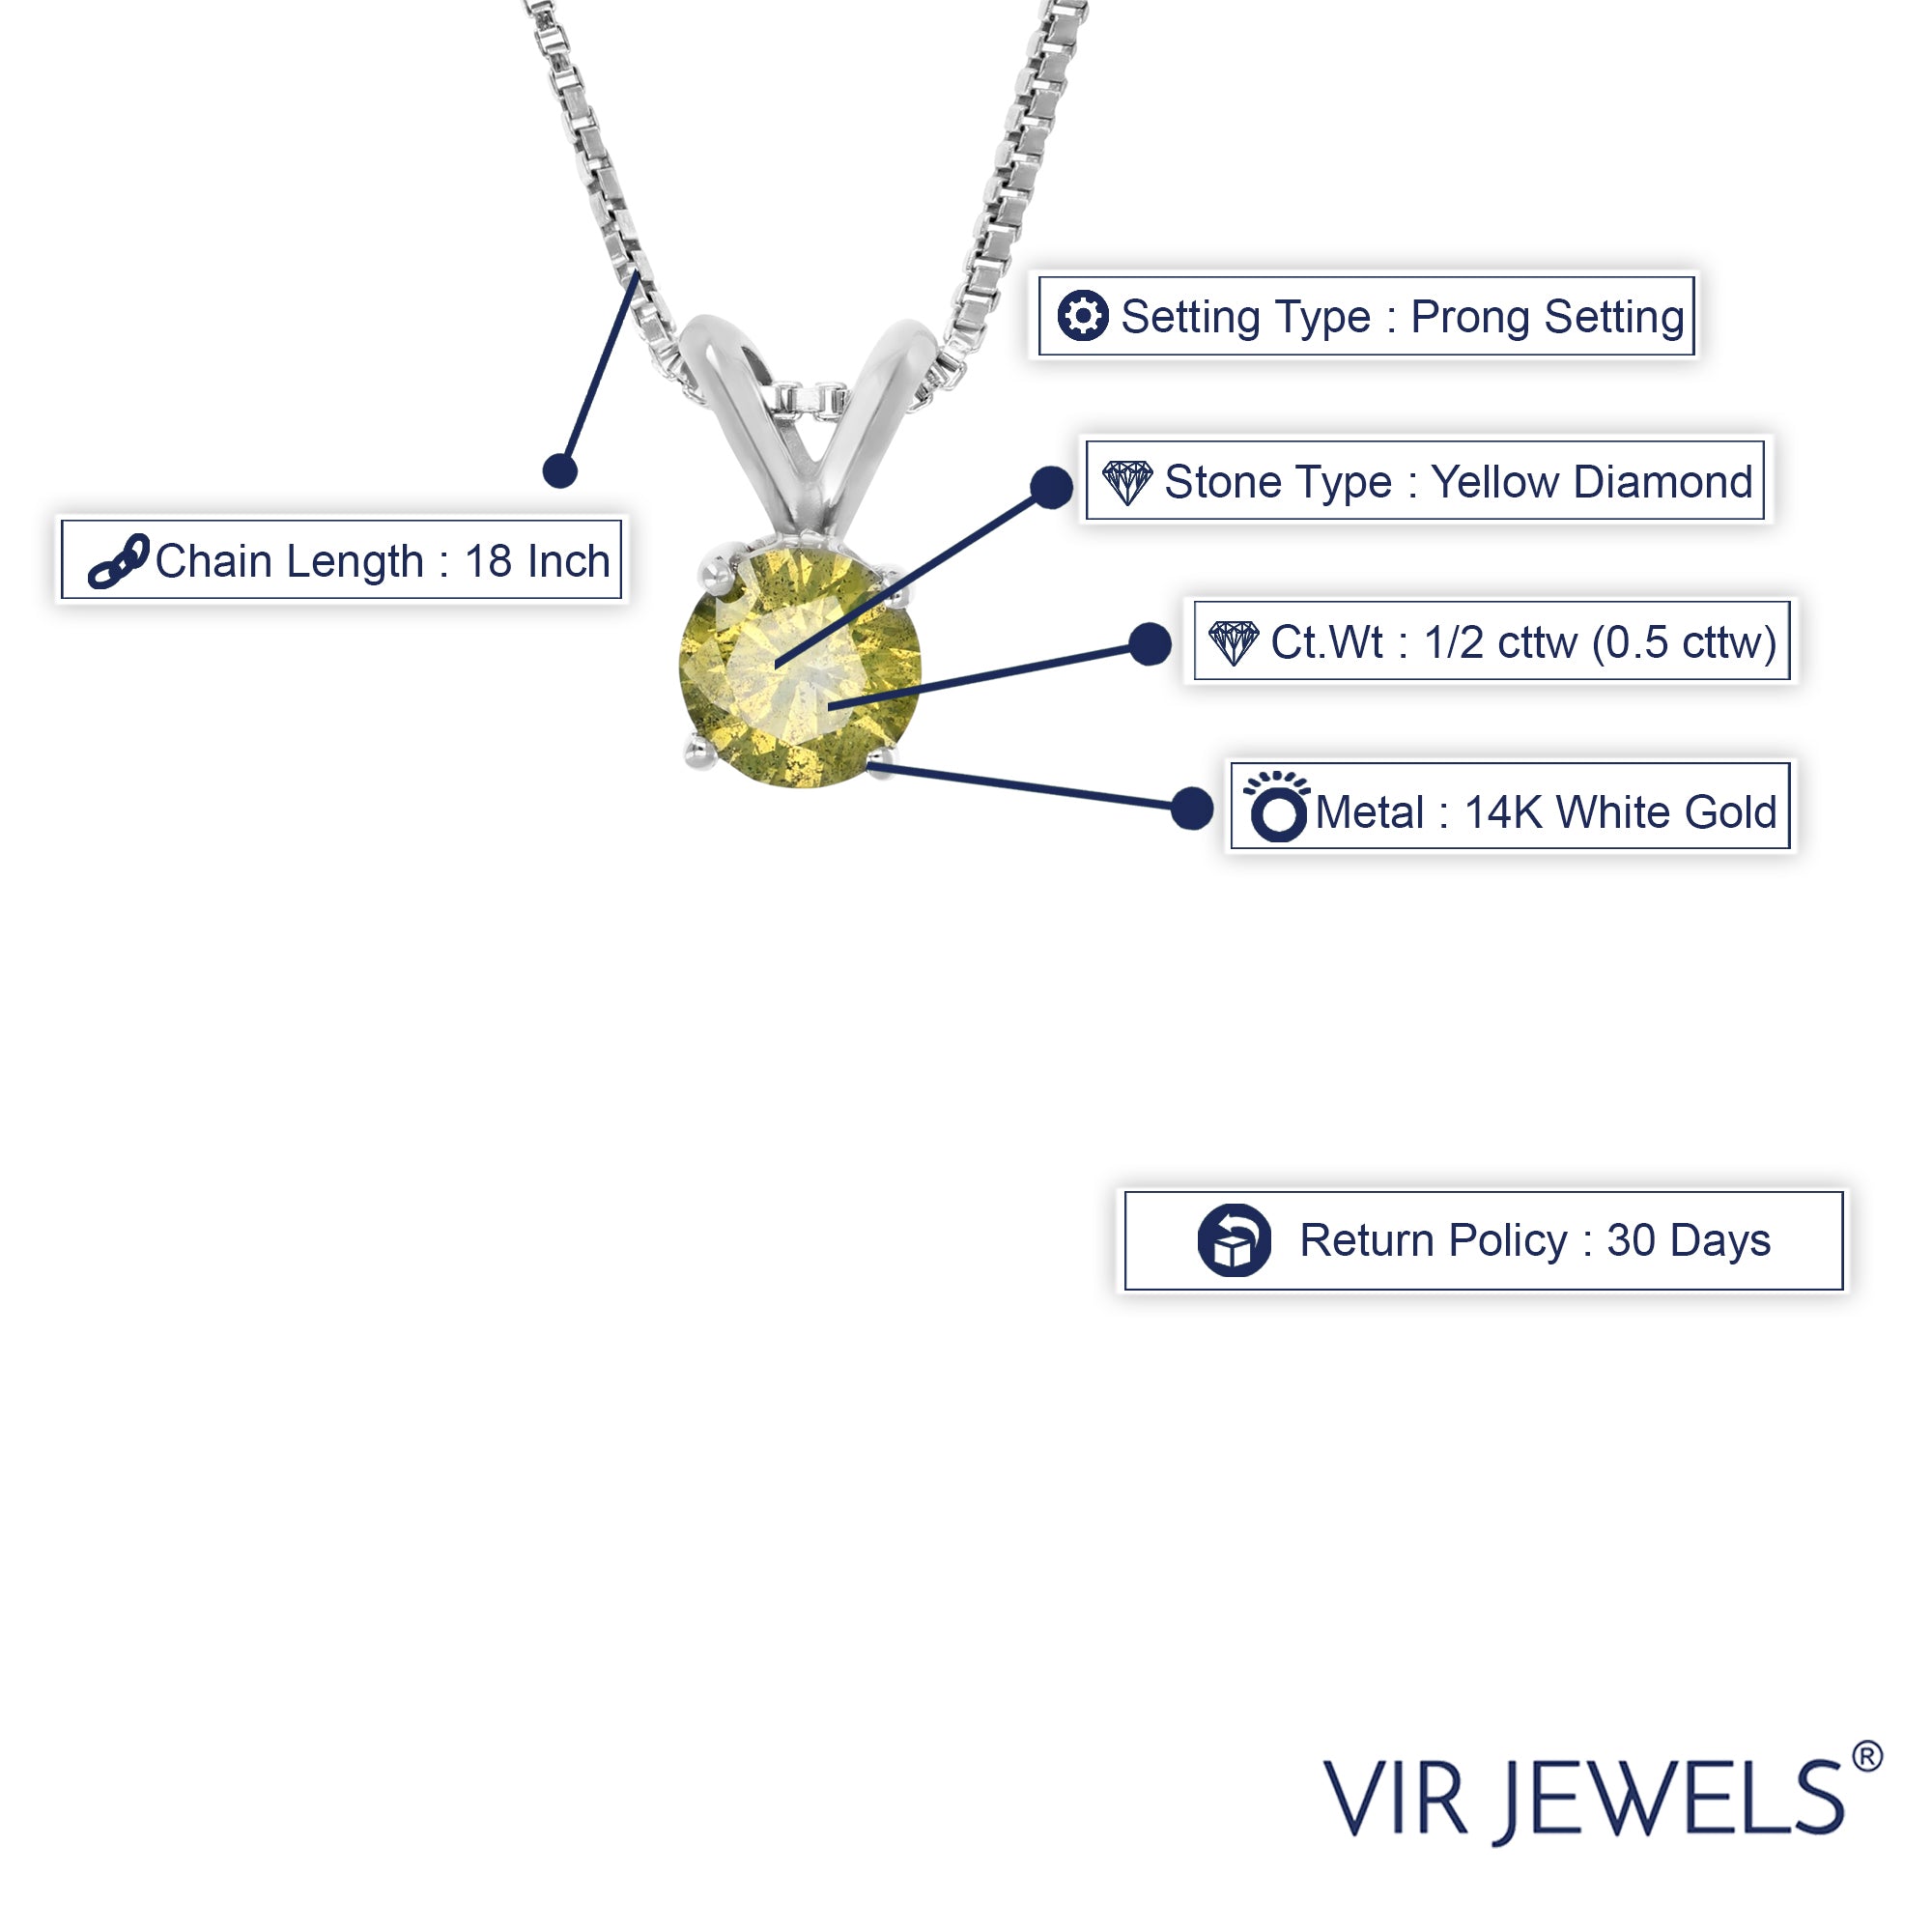 1/2 cttw Diamond Pendant, Yellow Diamond Solitaire Pendant Necklace for Women in 14K White Gold with 18 Inch Chain, Prong Setting